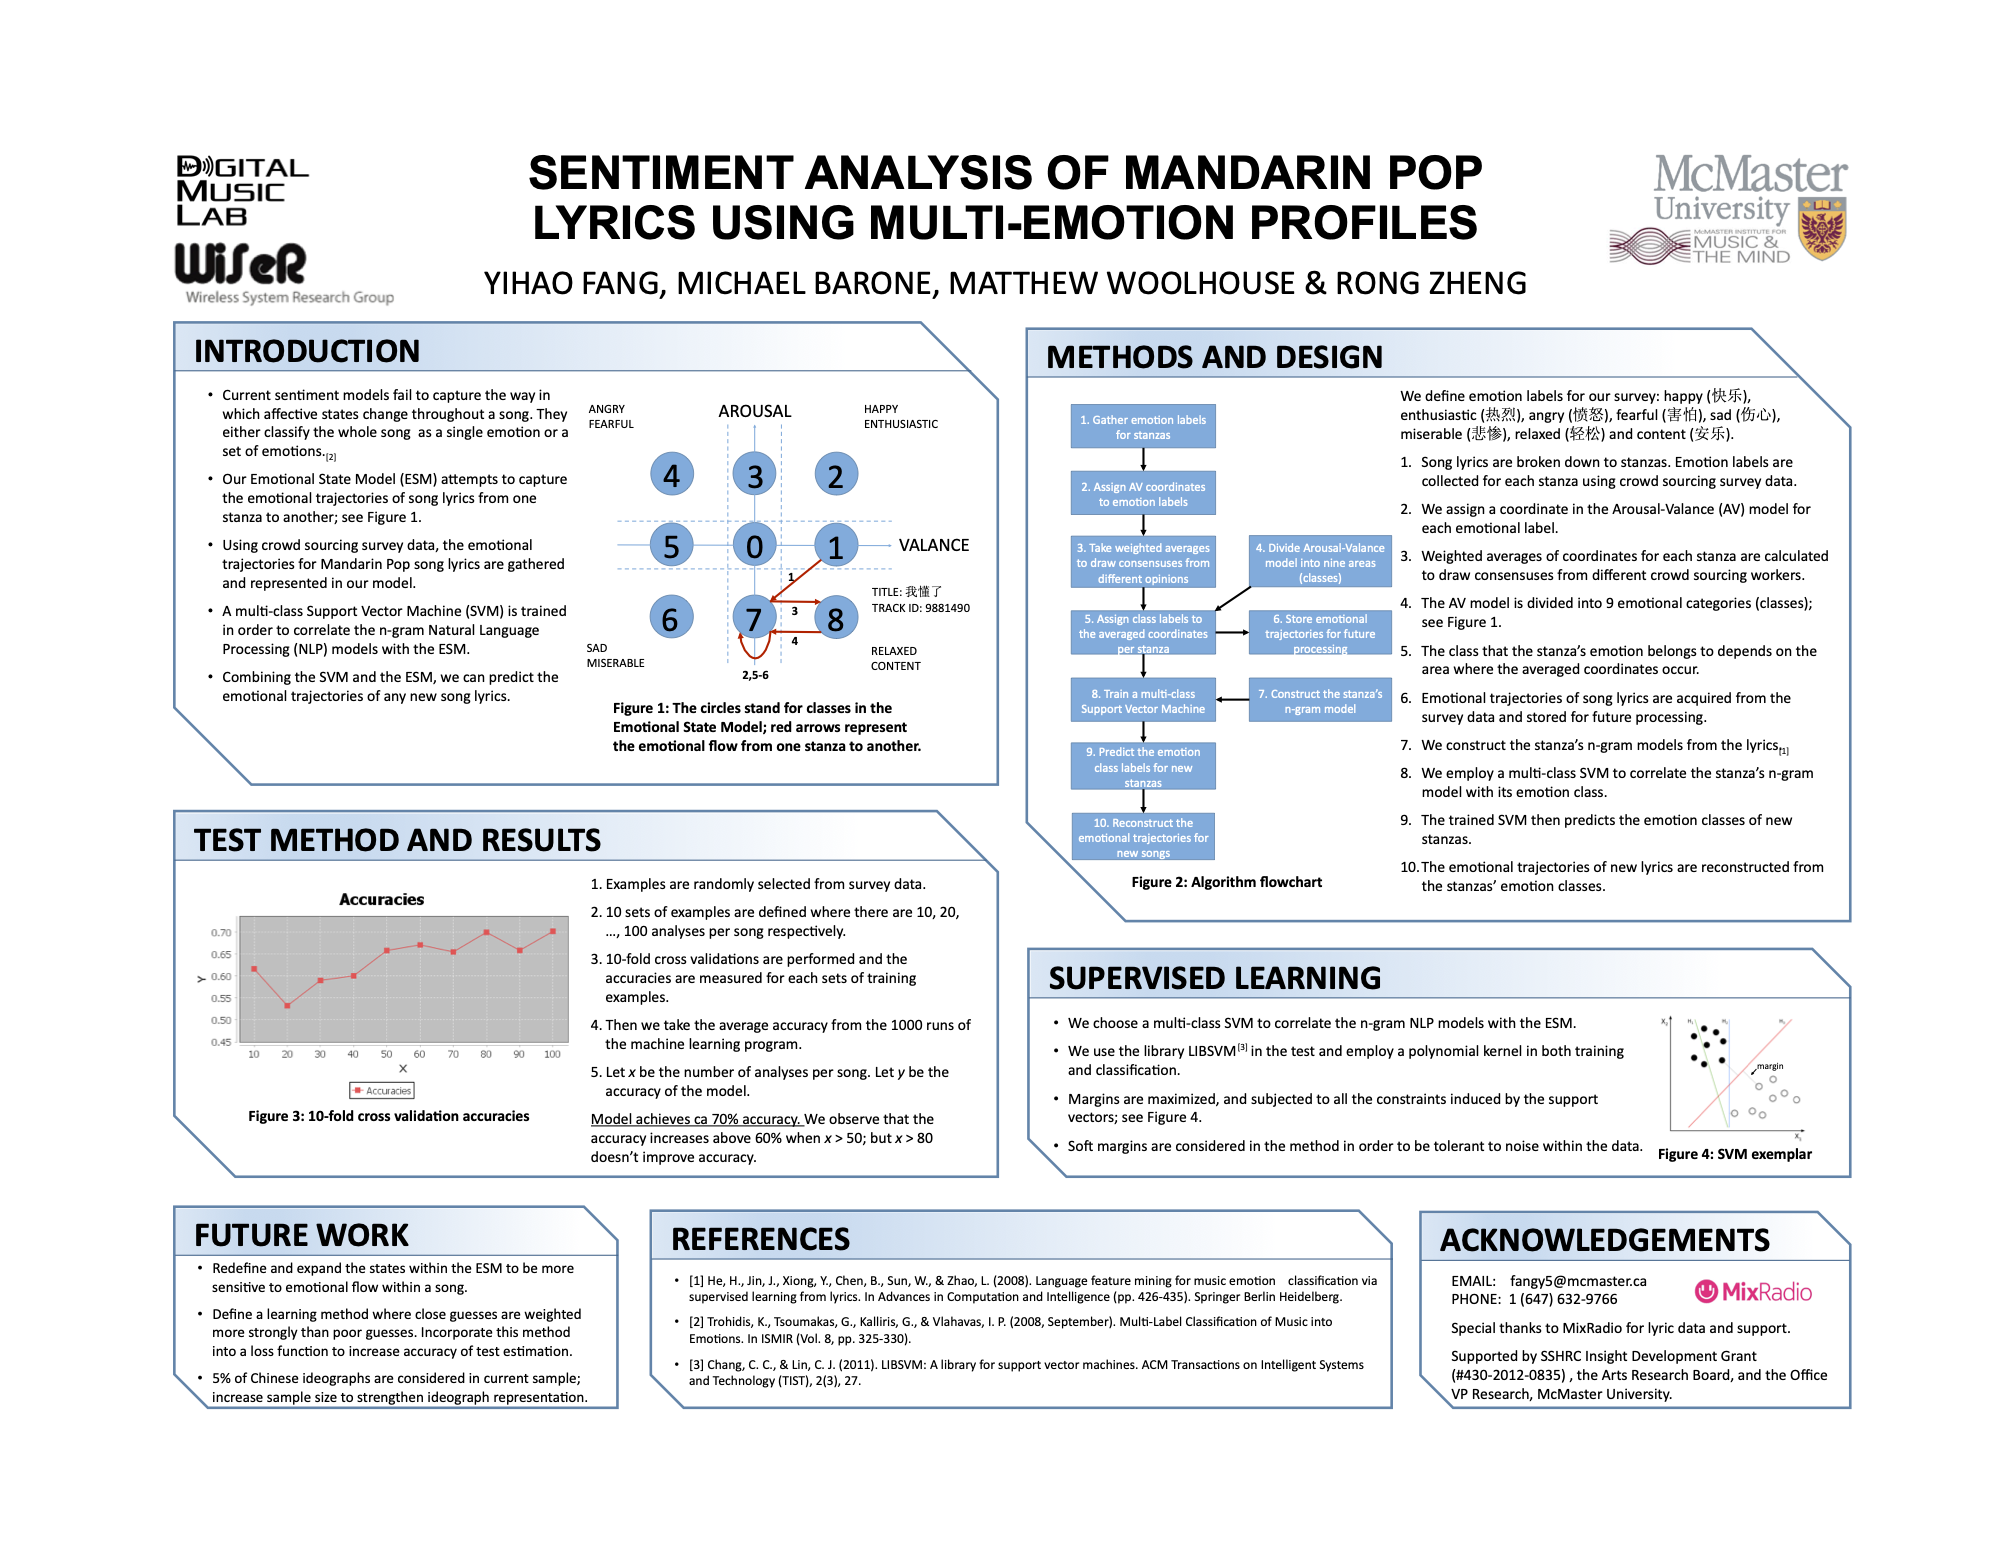 Poster for "Sentiment Analysis of Mandarin Pop Lyrics Using Multi-Emotion Profiles" by Yihao Fang, Michael Barone, Matthew Woolhouse, and Rong Zheng. Clicking the image will direct to the PDF version of the poster. 